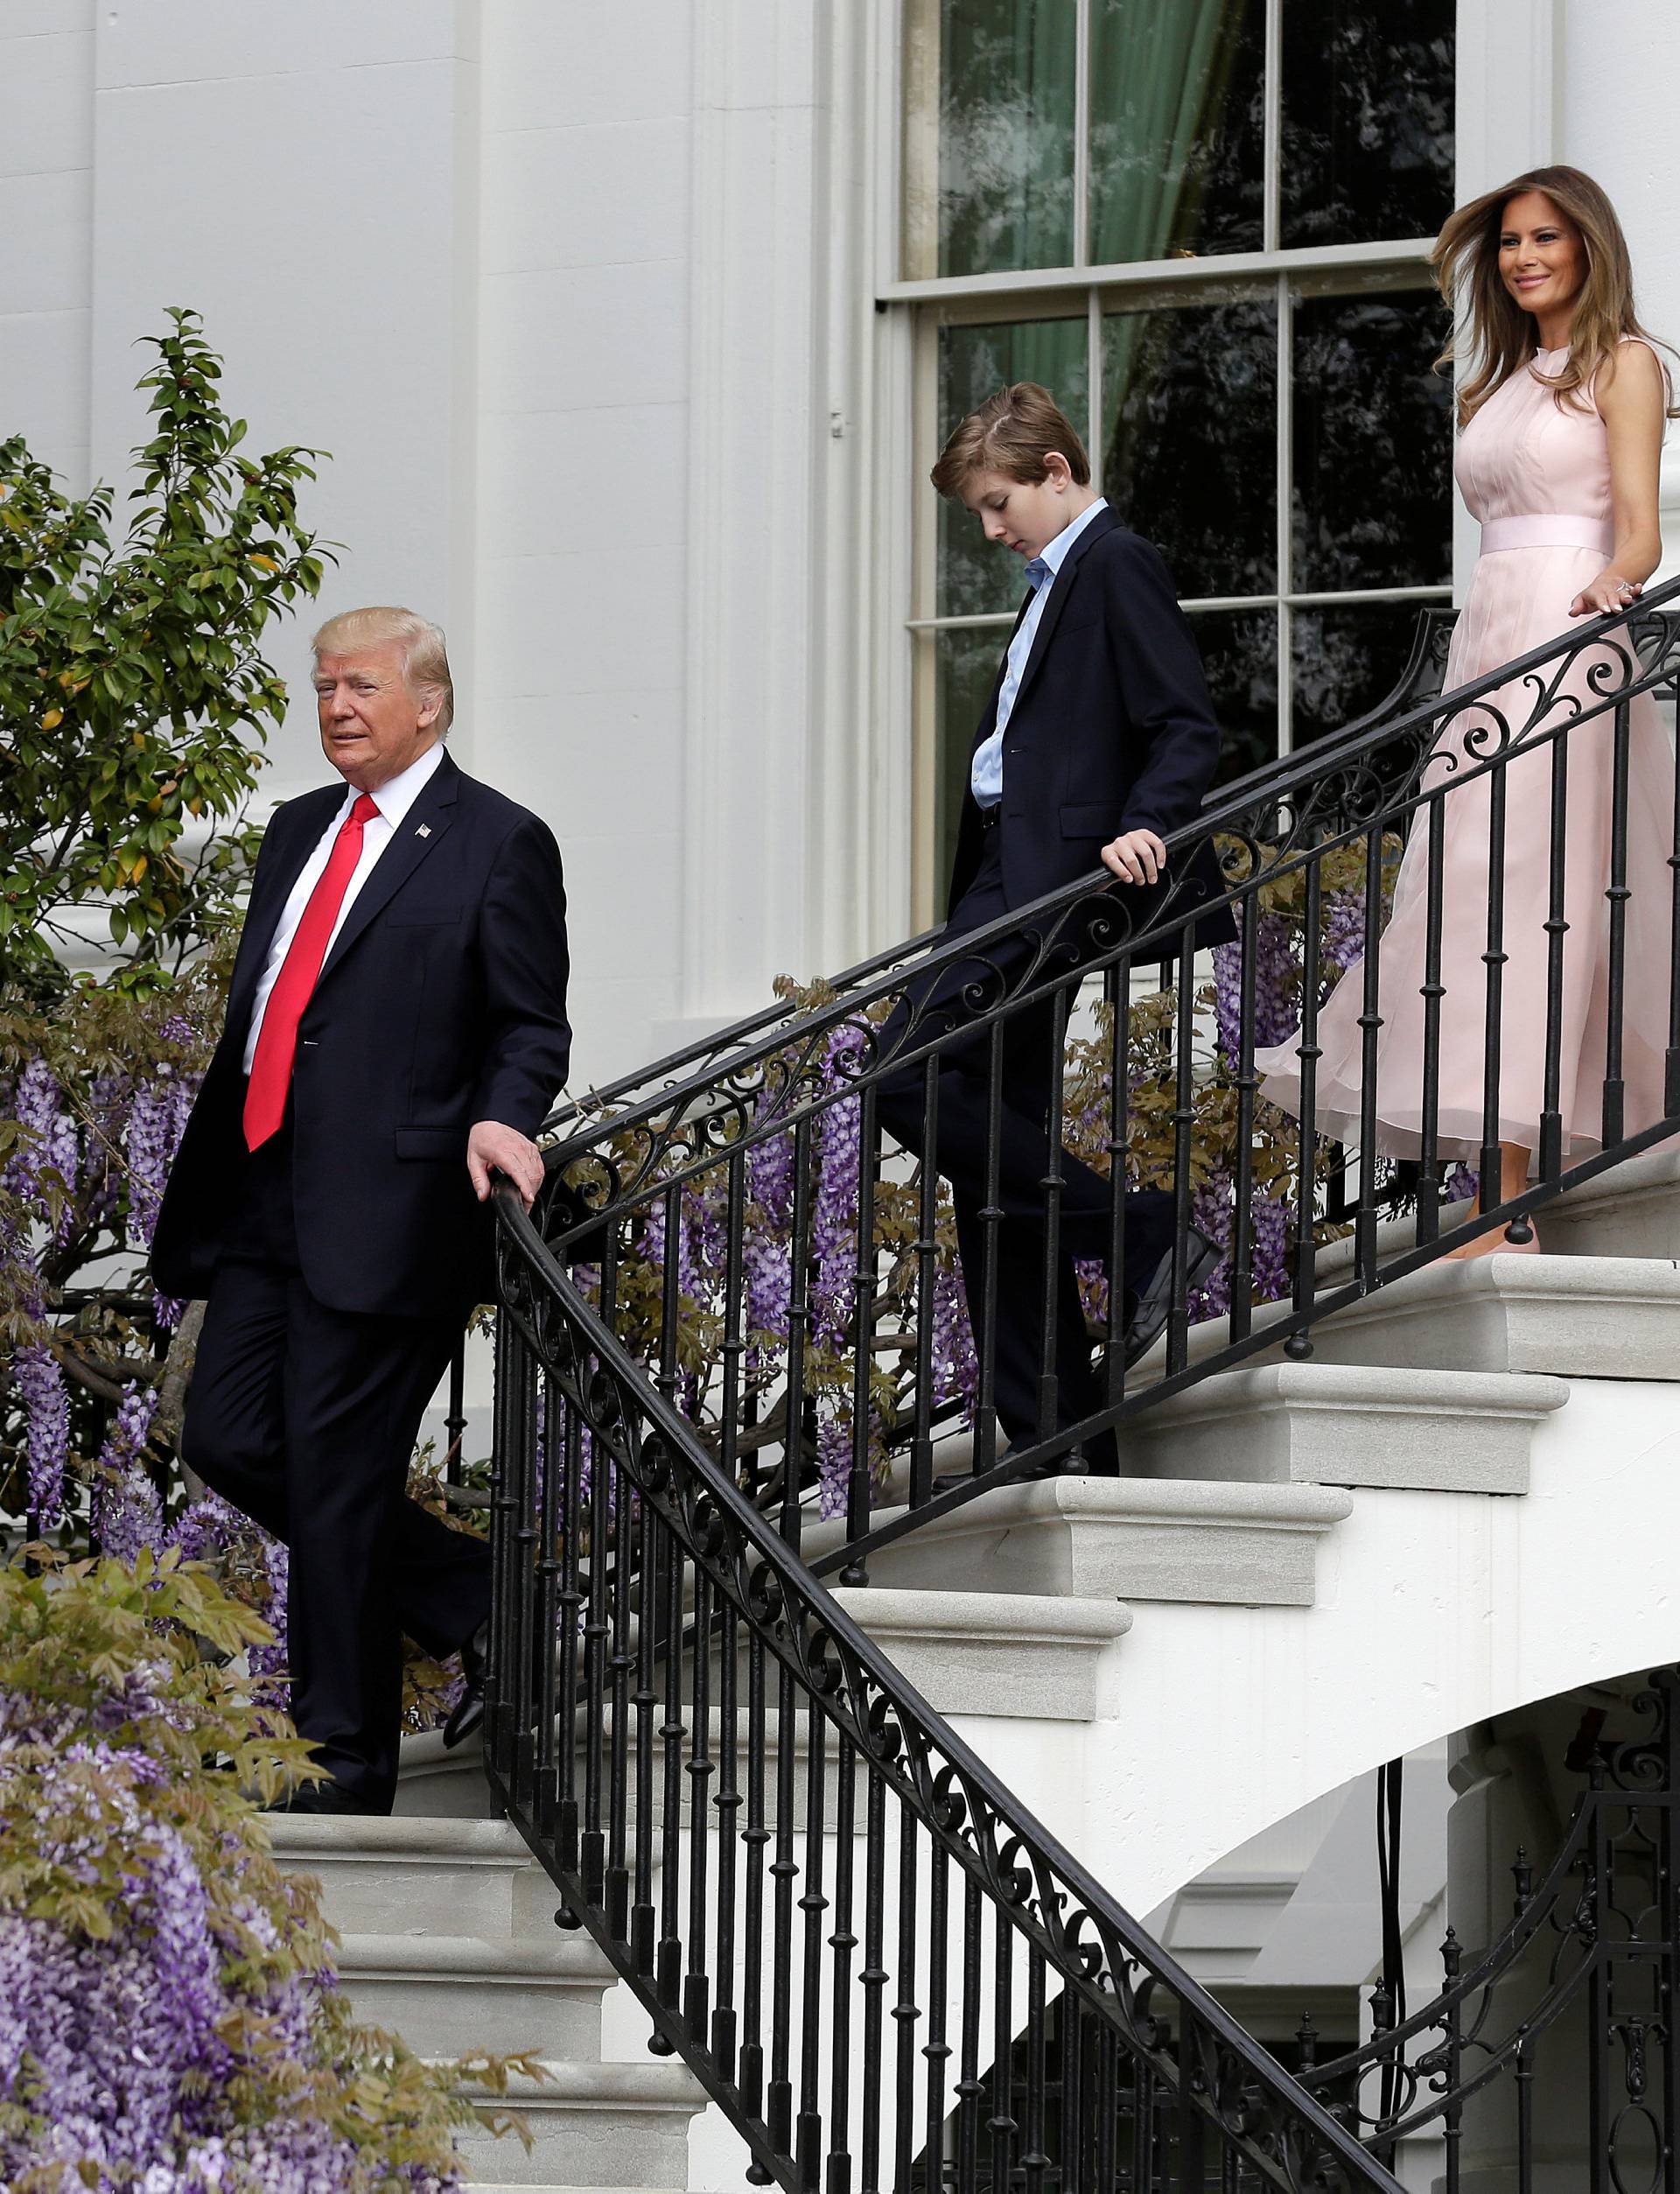 U.S. President Donald Trump, U.S. first lady Melania Trump and their son Barron descend a staircase during the 139th annual White House Easter Egg Roll on the South Lawn of the White House in Washington